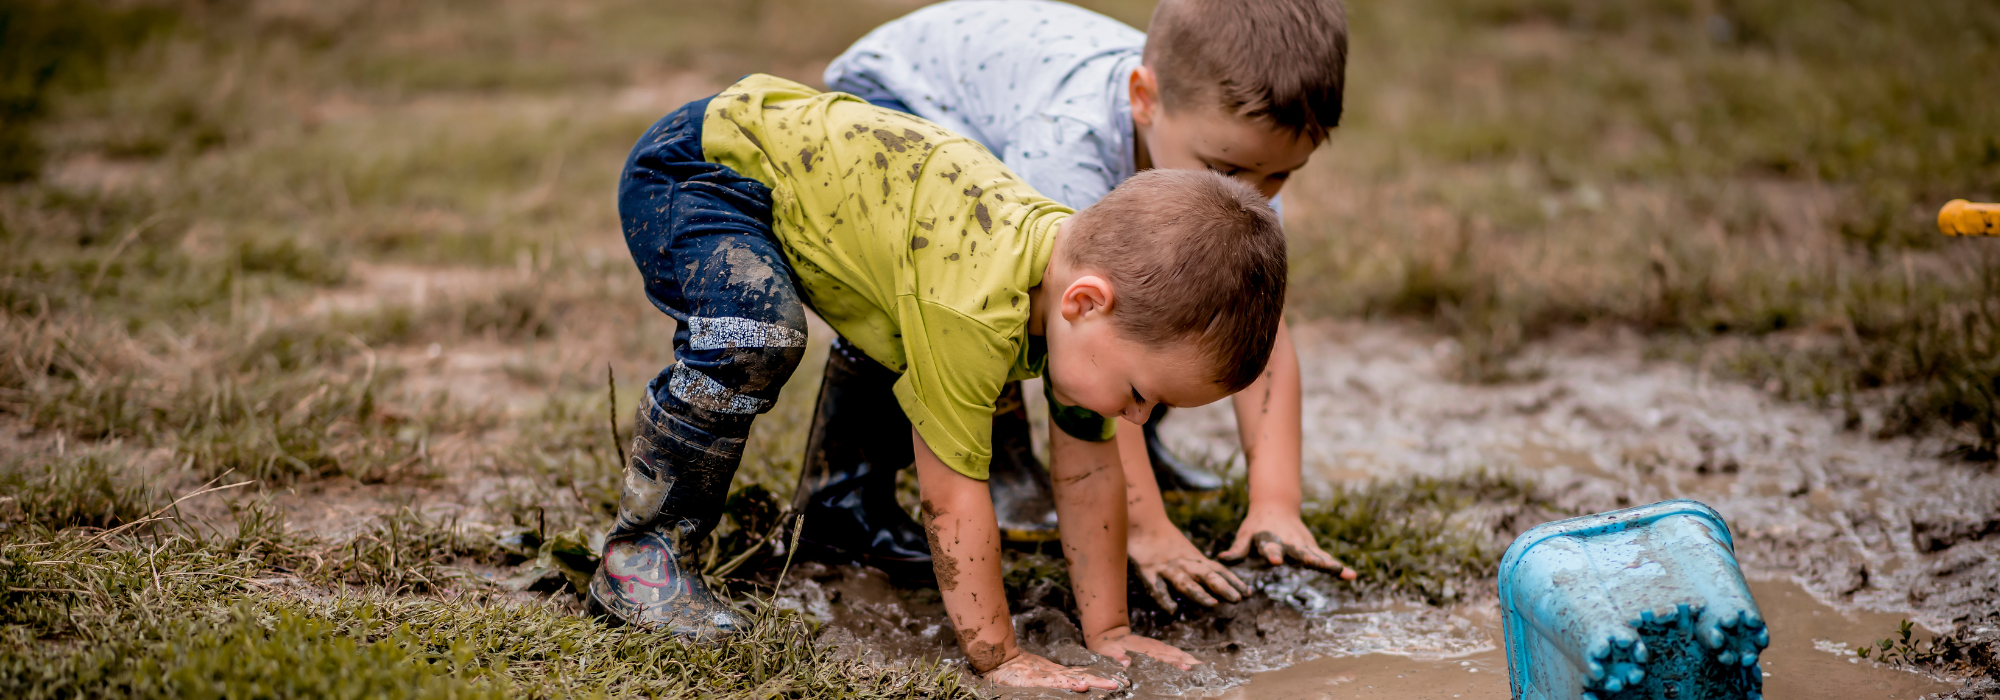 Two boys play in the mud.